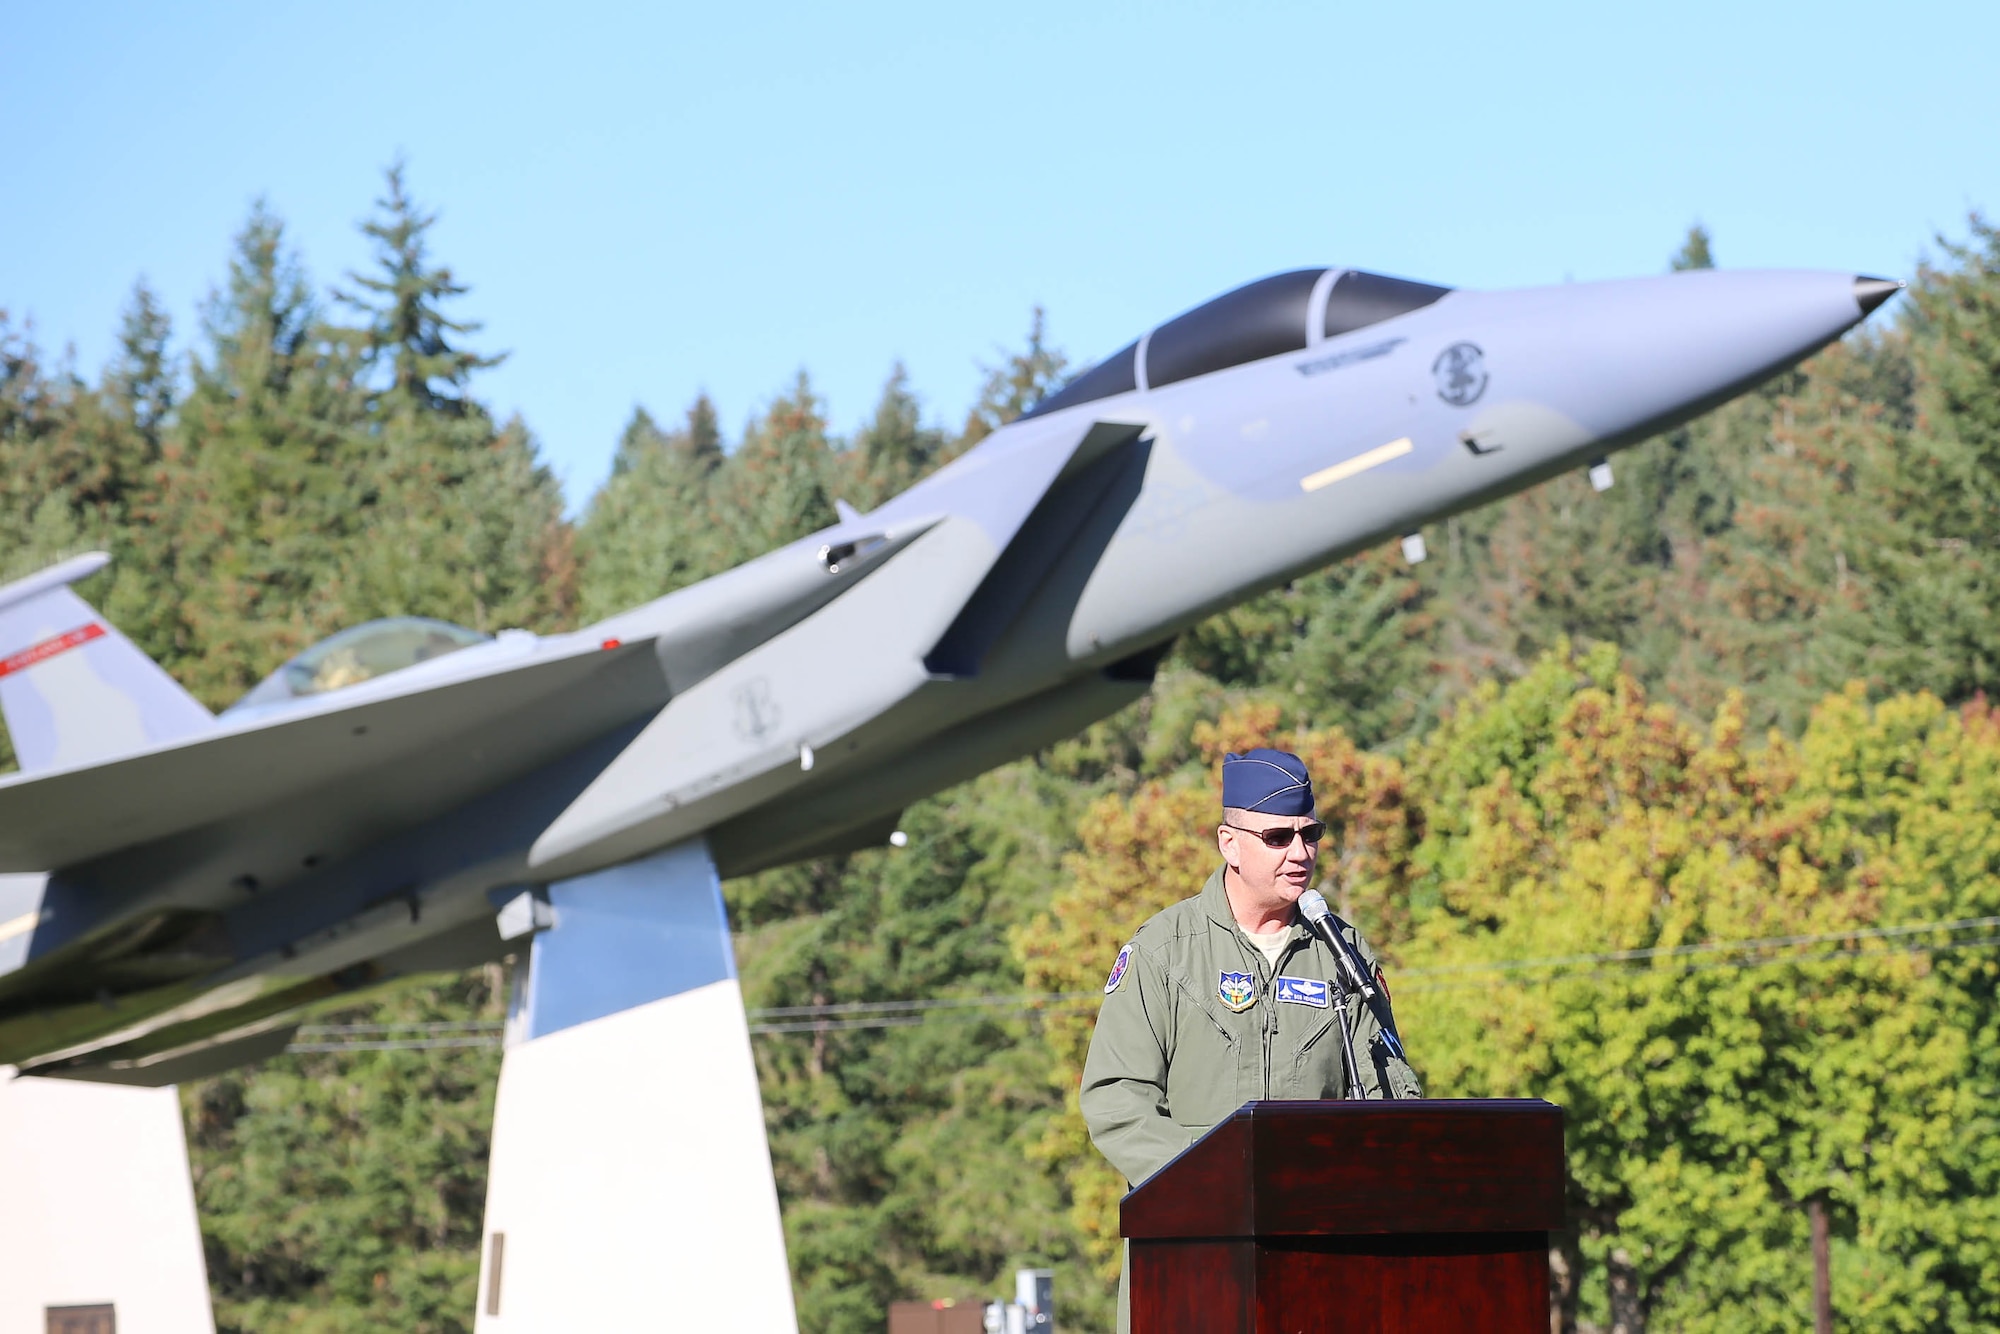 The Western Air Defense Sector holds a formal dedication ceremony Sept. 13 at the WADS Air Park for a McDonnell Douglas F-15A Eagle.  The guest speaker, Col. Robert Hehemann, the Individual Mobilization Augmentee assigned to the NORAD/US NORTHERN Command J3 Operations Division, highlights the F-15 capabilities and its role in NORAD air defense.  The WADS has been guarding America's skies in the same building 24/7 since 1960 and regularly uses F-15 alert aircraft to perform its mission. (U.S. National Guard photo by Capt. Joseph Siemandel)
